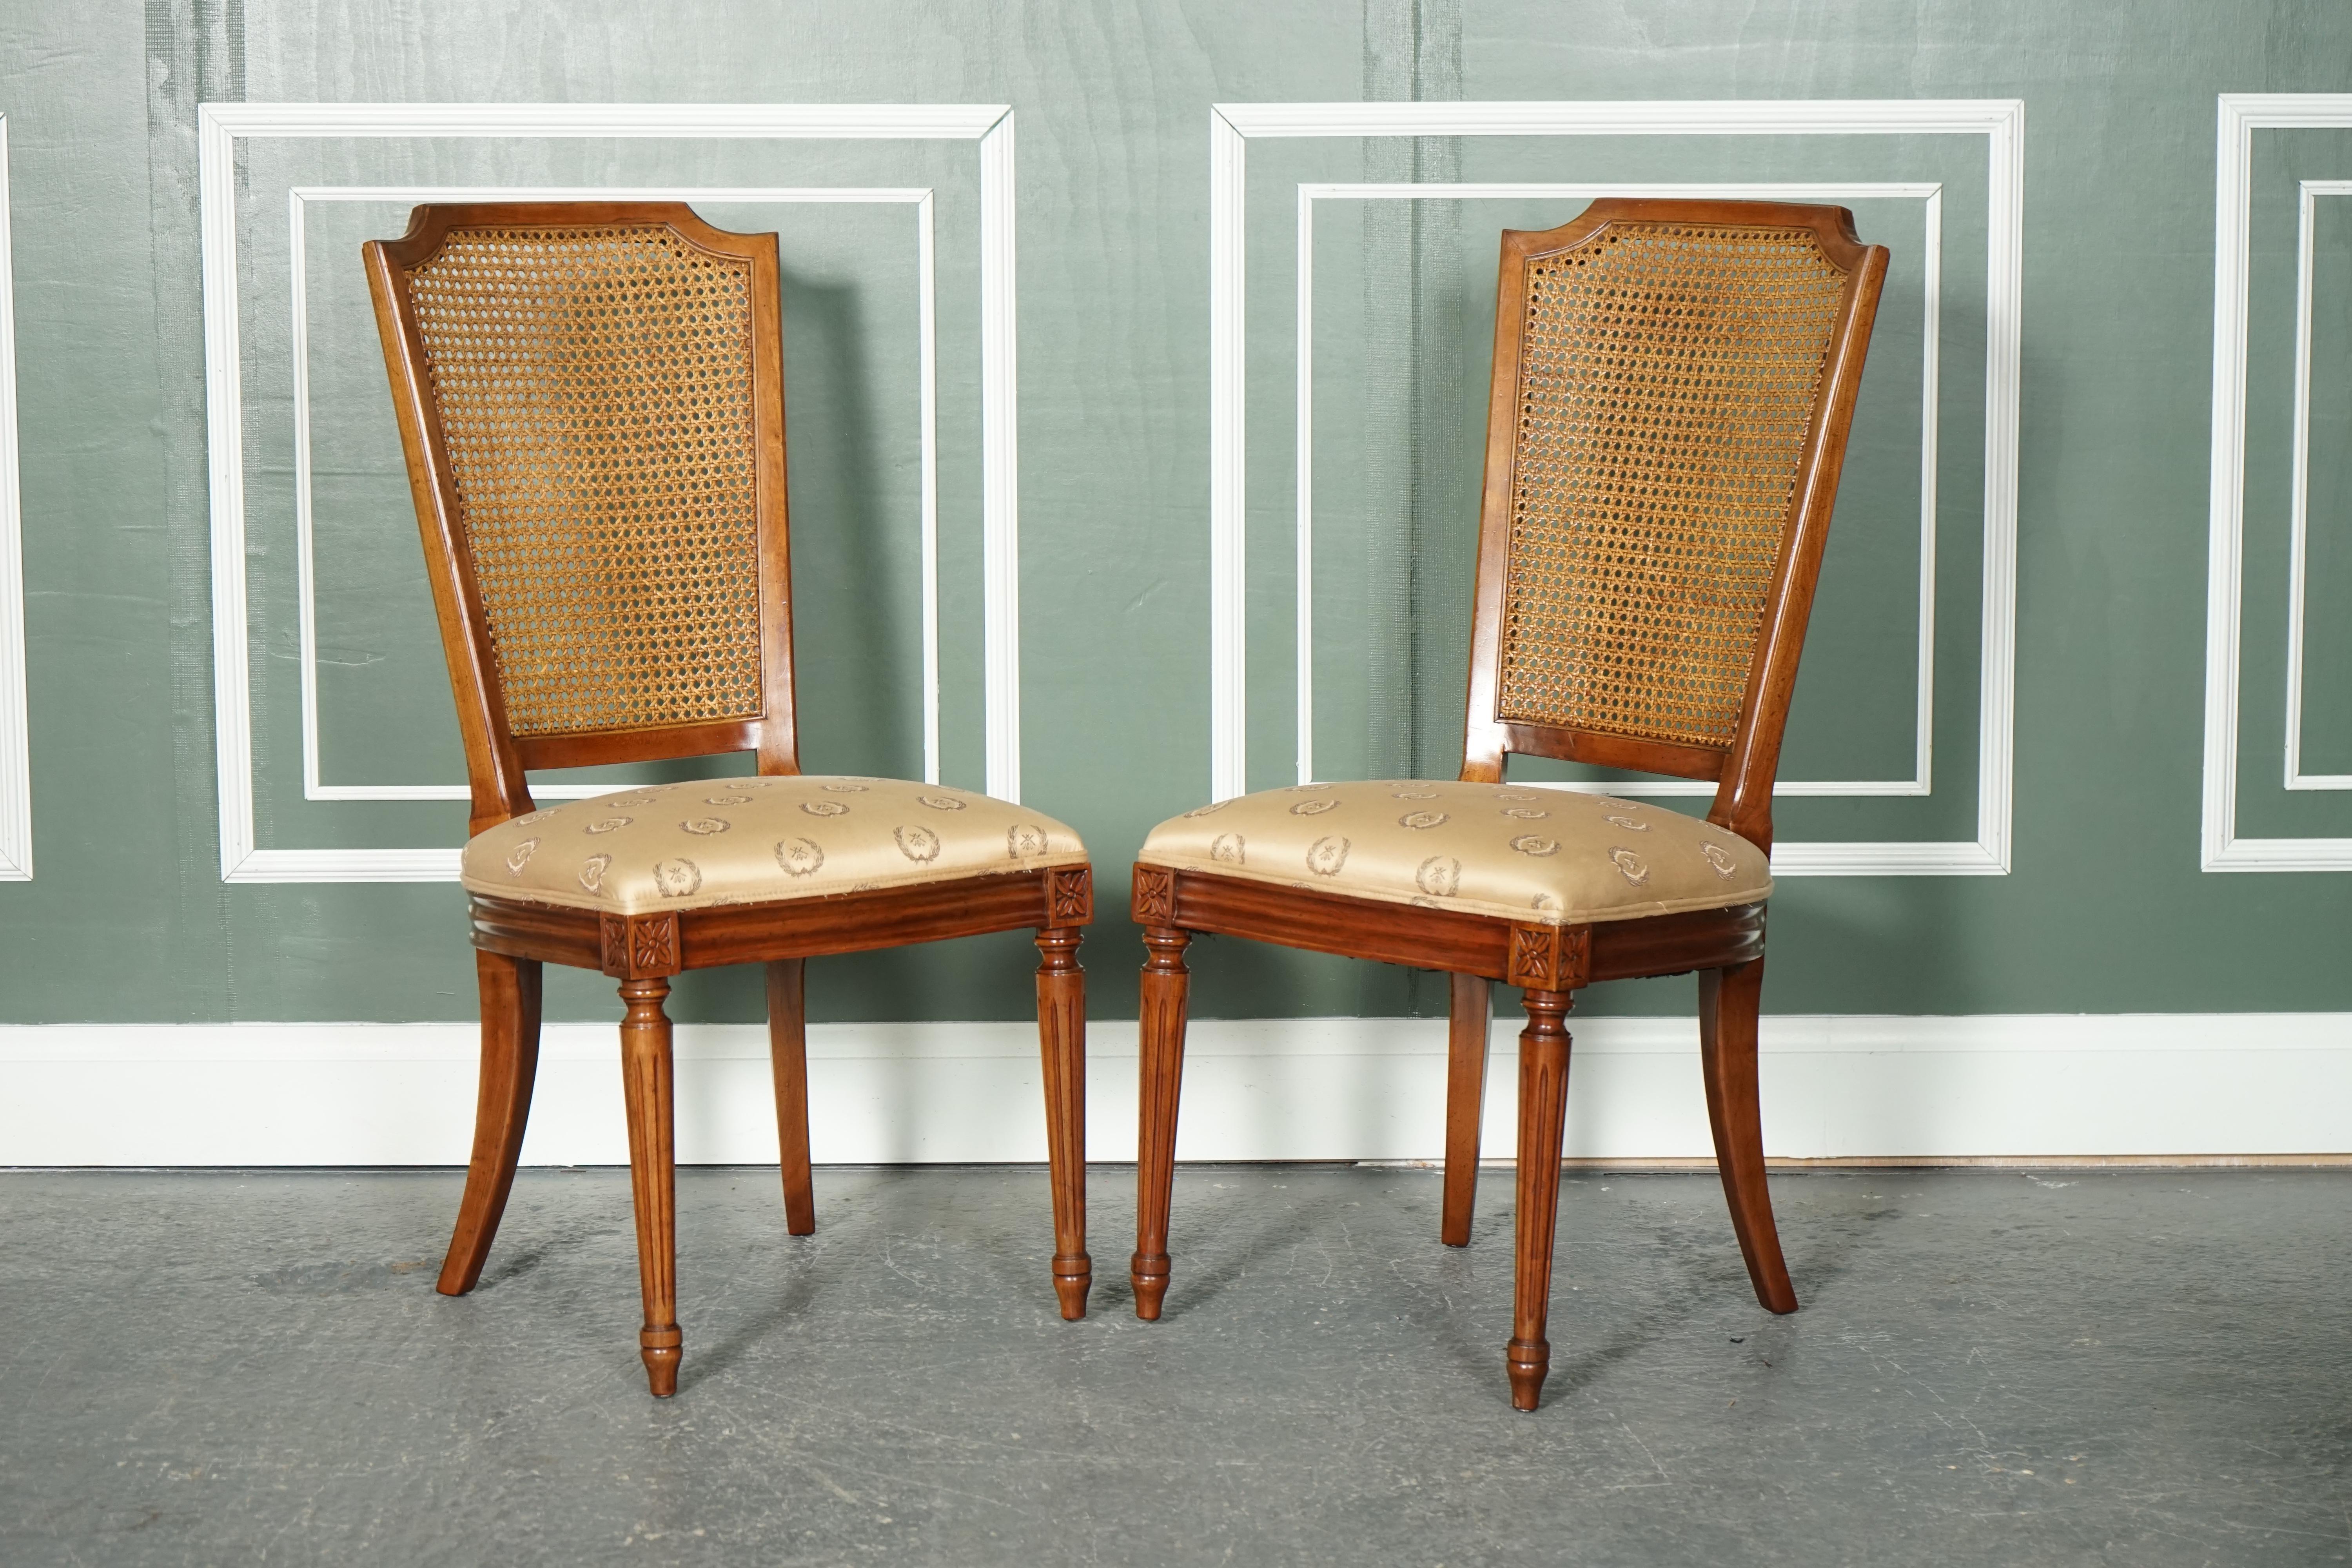 LOVELY SET OF 6 WALNUT BANDED WITH BERGERE BACKS DINING CHAIRS MADE BY KiNDEL 7